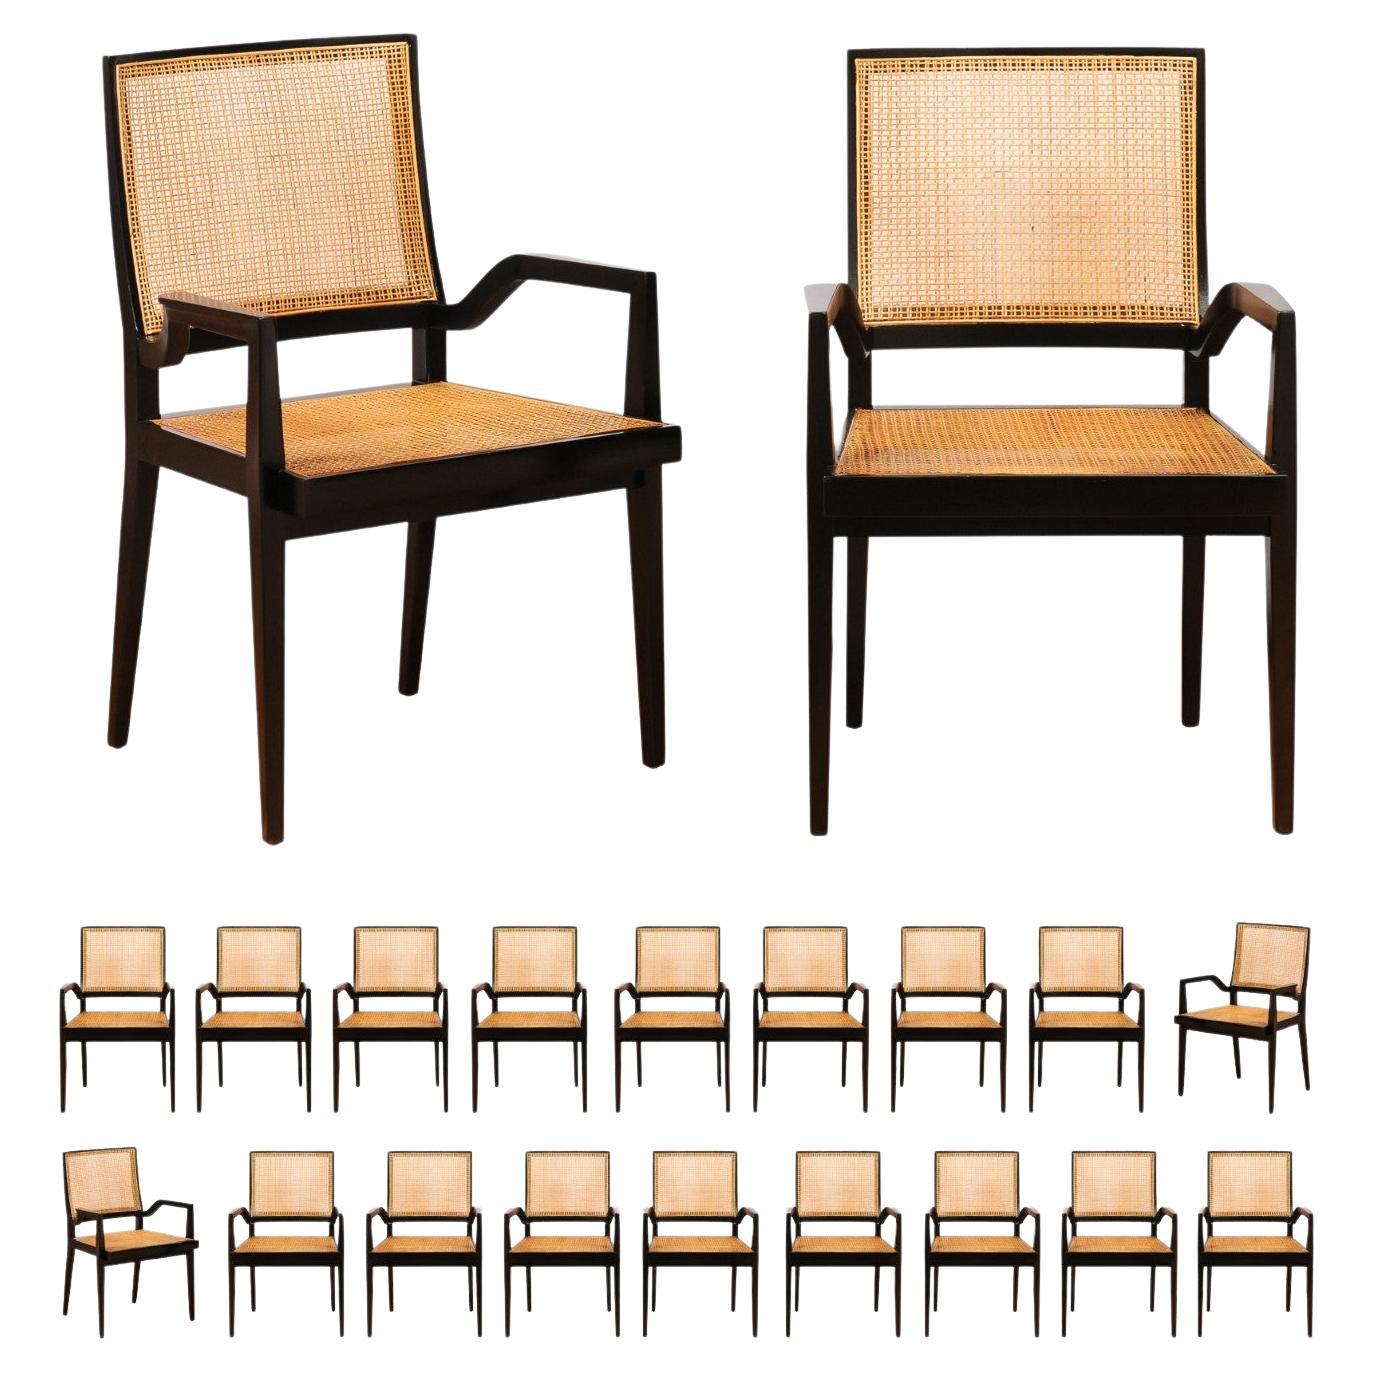 Dramatic Set of 20 Black Lacquer Double Cane Arm Chairs by Michael Taylor